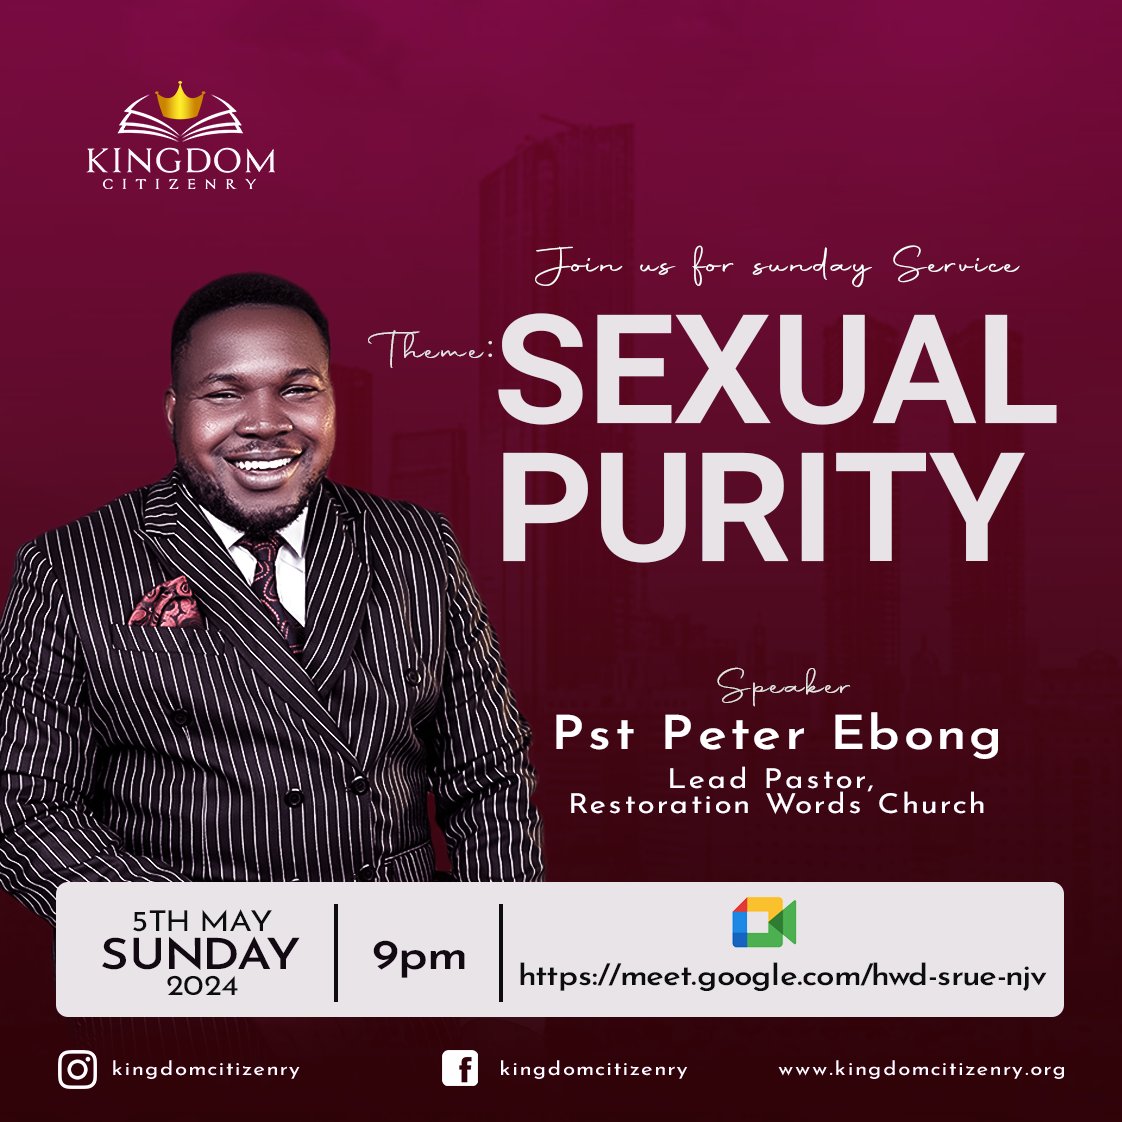 This Sunday with Pst. Peter Ebong @PeterEbong3, Lead Pastor, Restoration Words Church!!! Topic: Sexual Purity Time: 09:00 pm Google Meet: meet.google.com/hwd-srue-njv 📍You can't afford to miss!! Make it a date! 💖✨